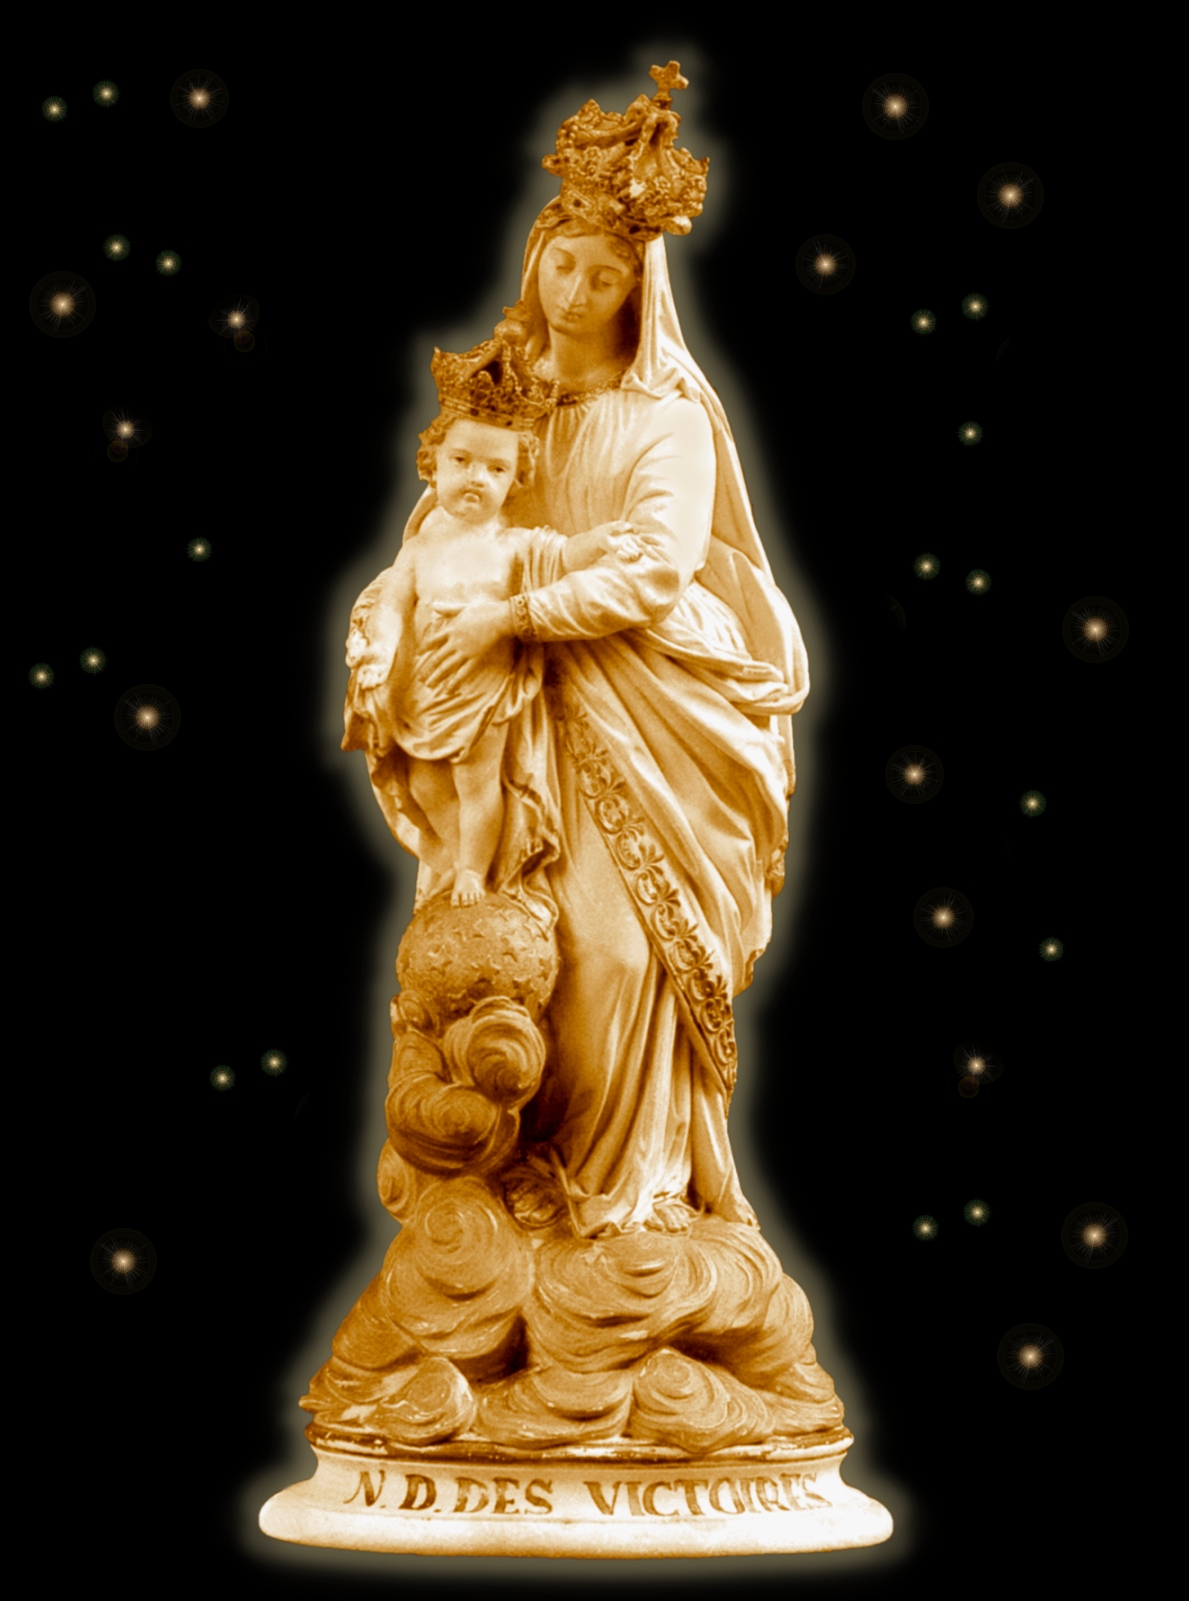 OUR LADY OF VICTORIES